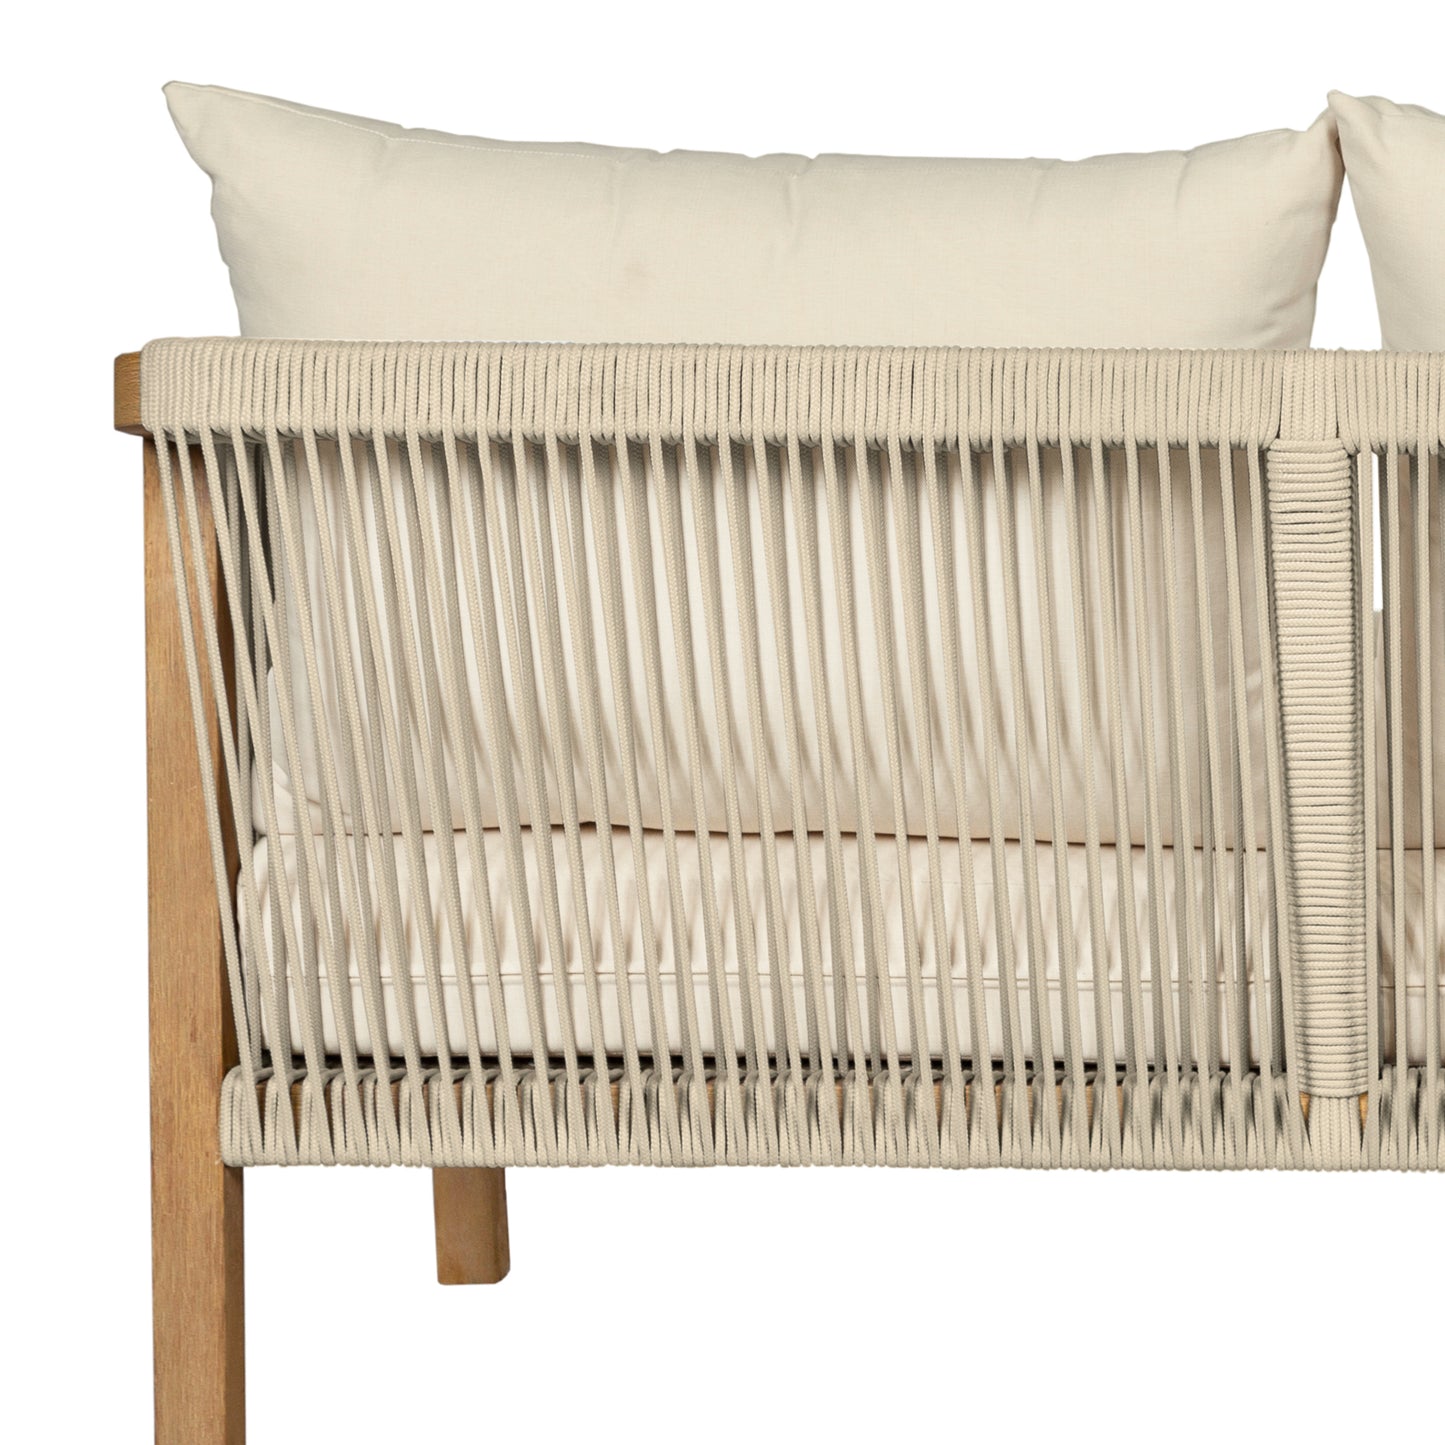 Cypress Outdoor Patio Sofa in Blonde Eucalyptus Wood and Light Gray Rope with Ivory Olefin Cushions